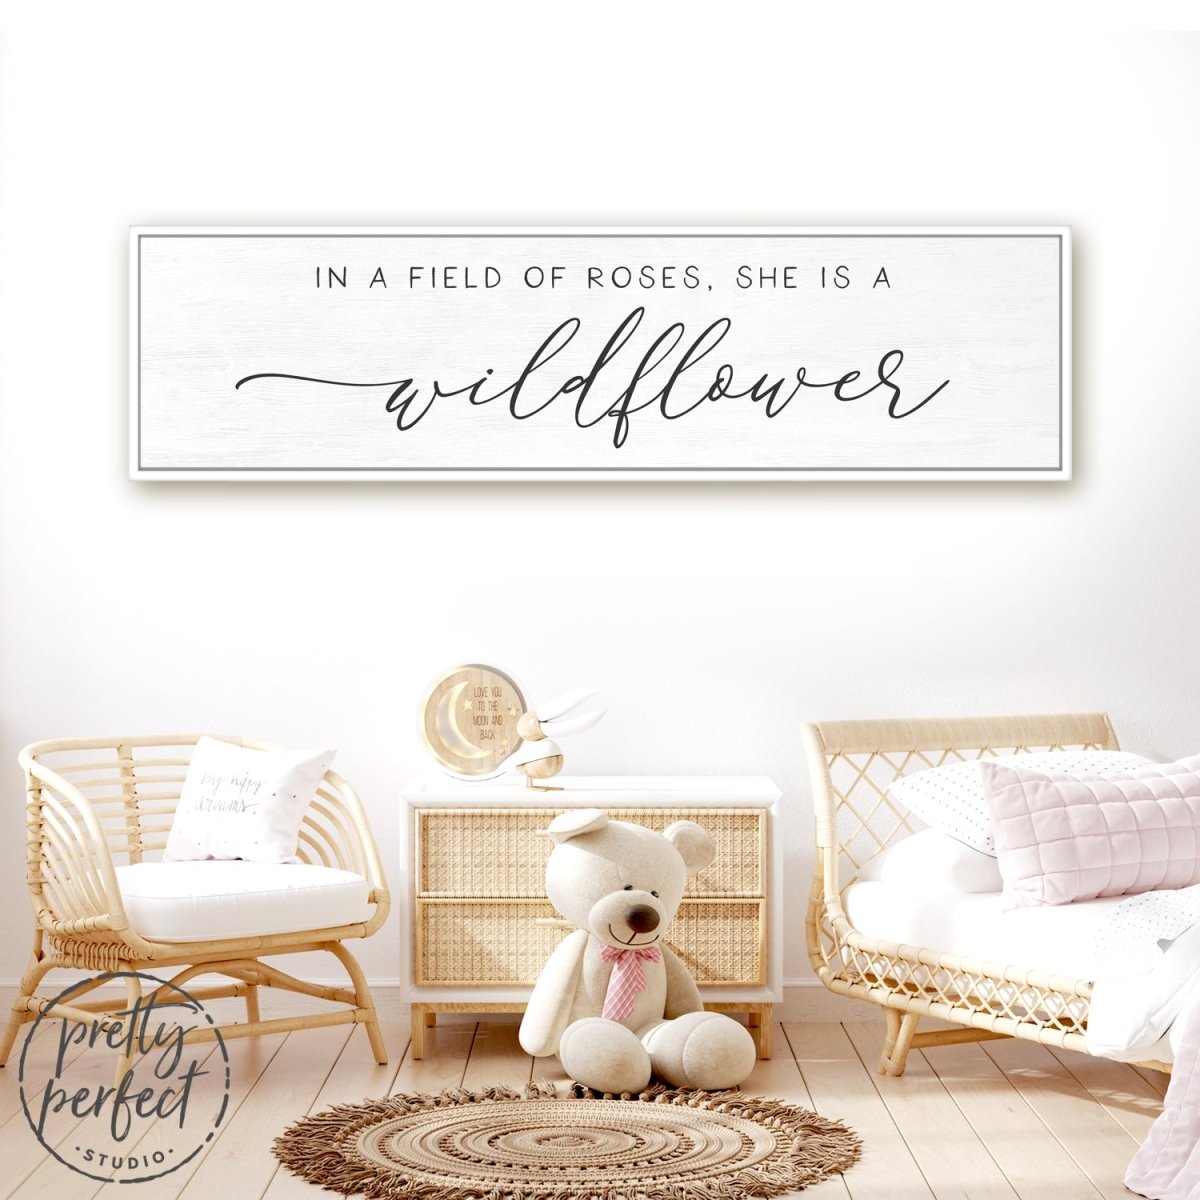 In A Field Of Roses She Is a Wildflower Sign – Pretty Perfect Studio